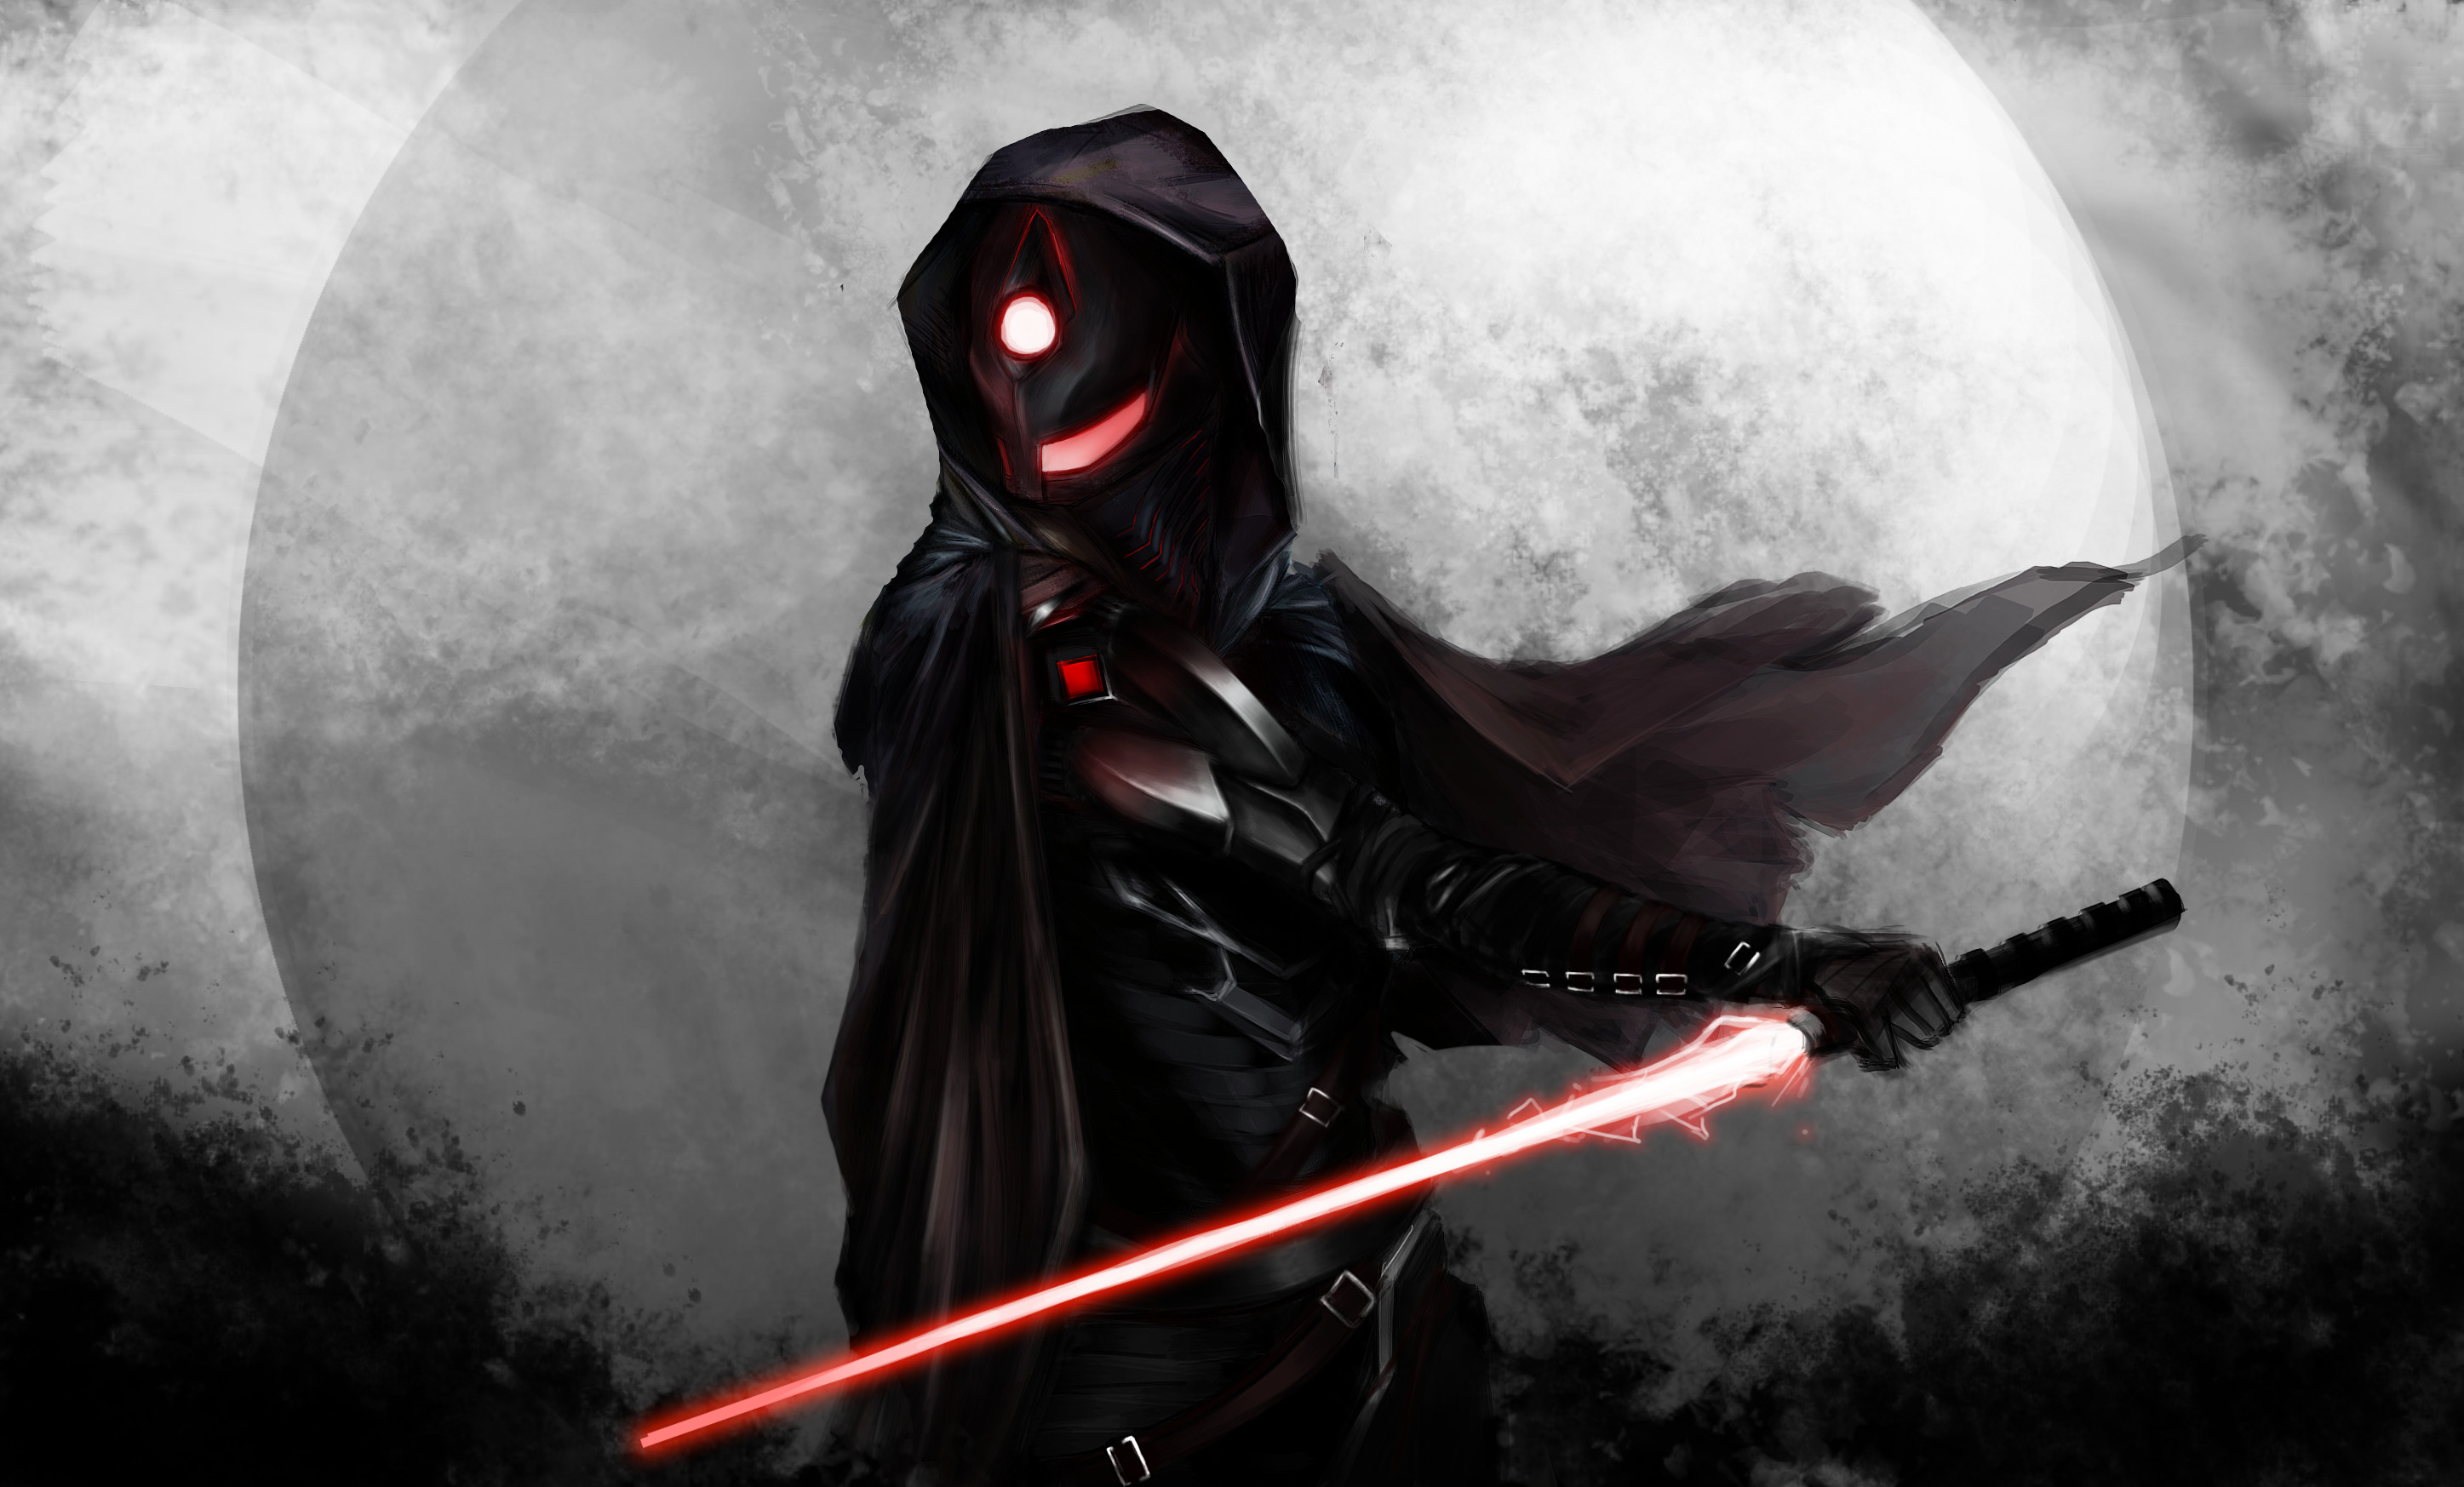 2894x1747 Star Wars Sith Empire Wallpaper Pictures to Pin on Pinterest .